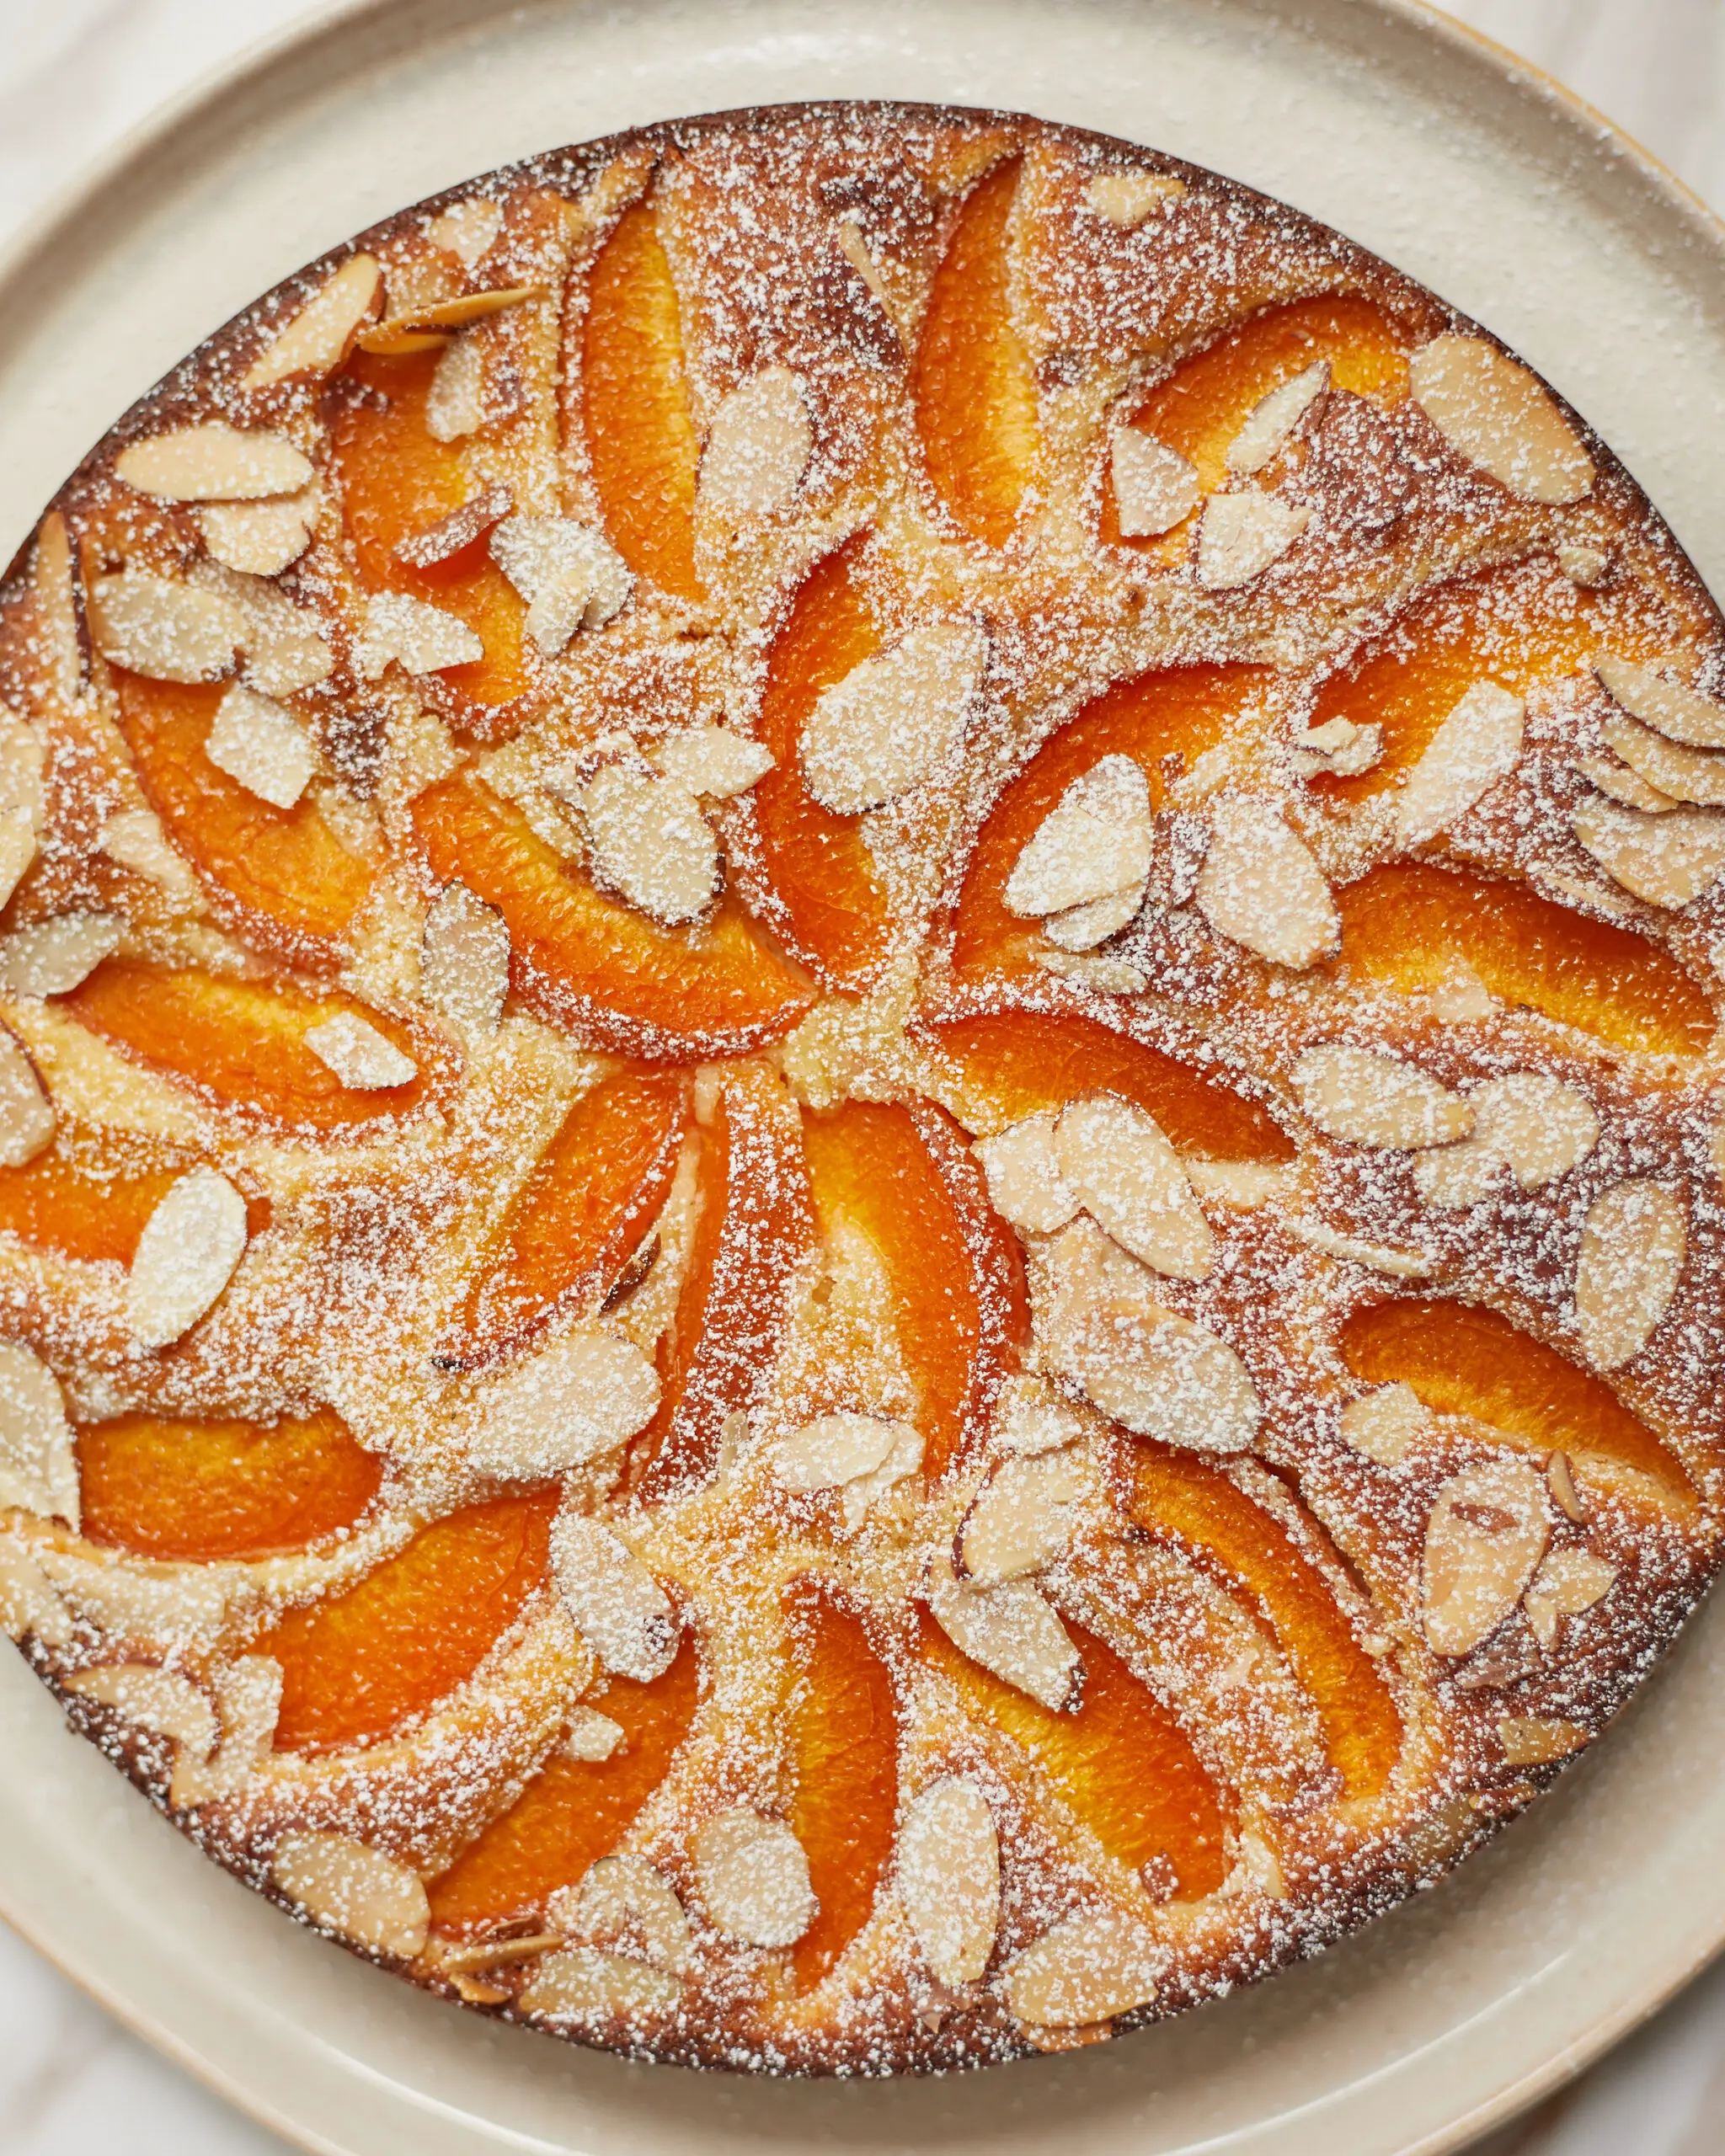 A single layer cake with concentric circles of sliced apricot and slivered almonds with a dusting of powdered sugar